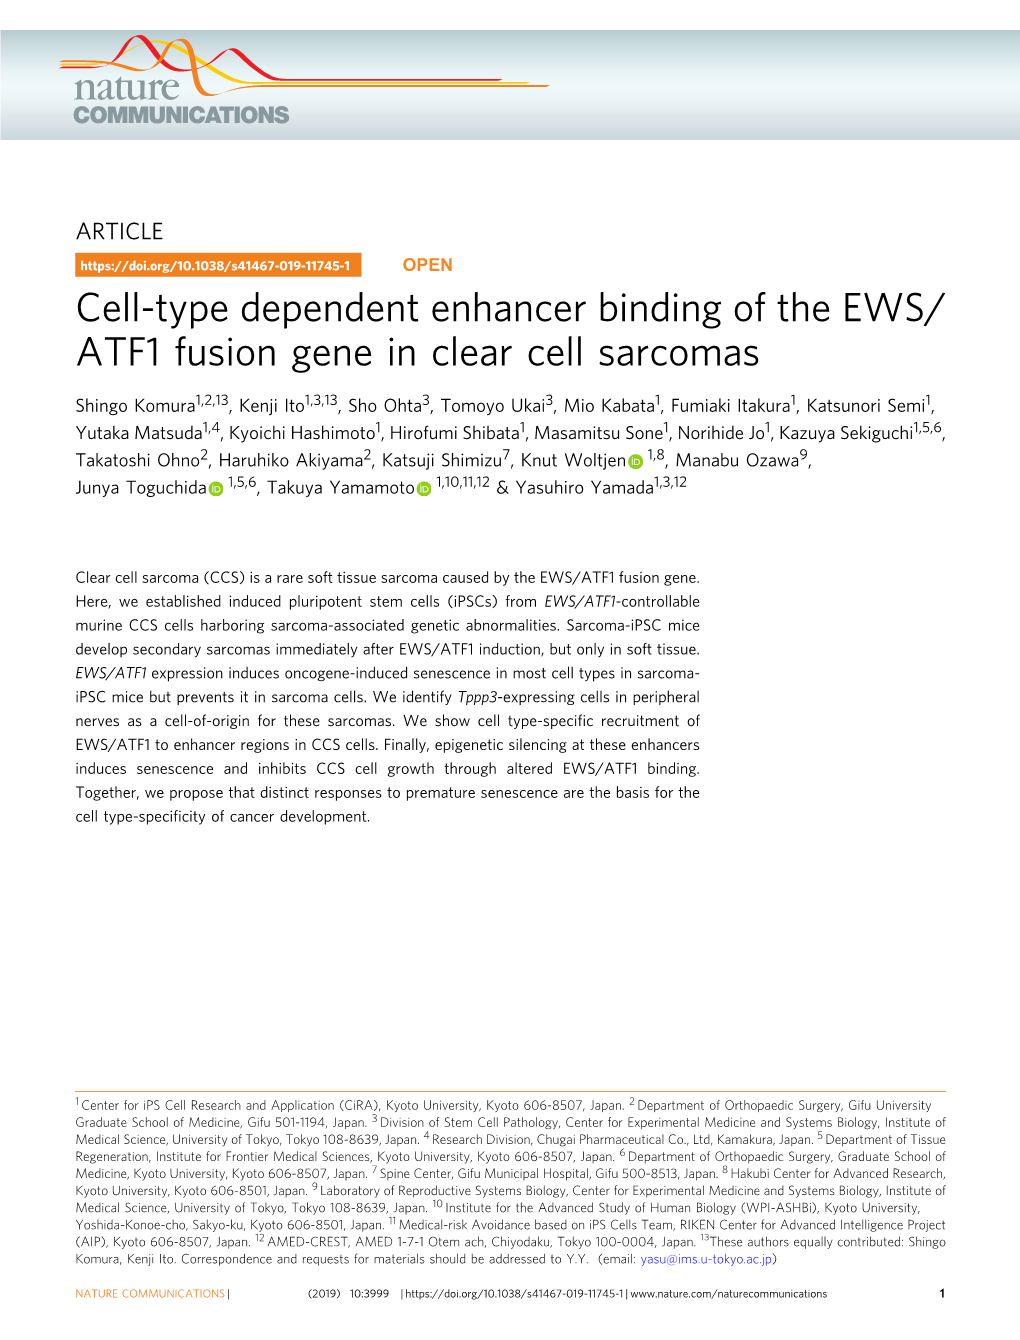 Cell-Type Dependent Enhancer Binding of the EWS/ATF1 Fusion